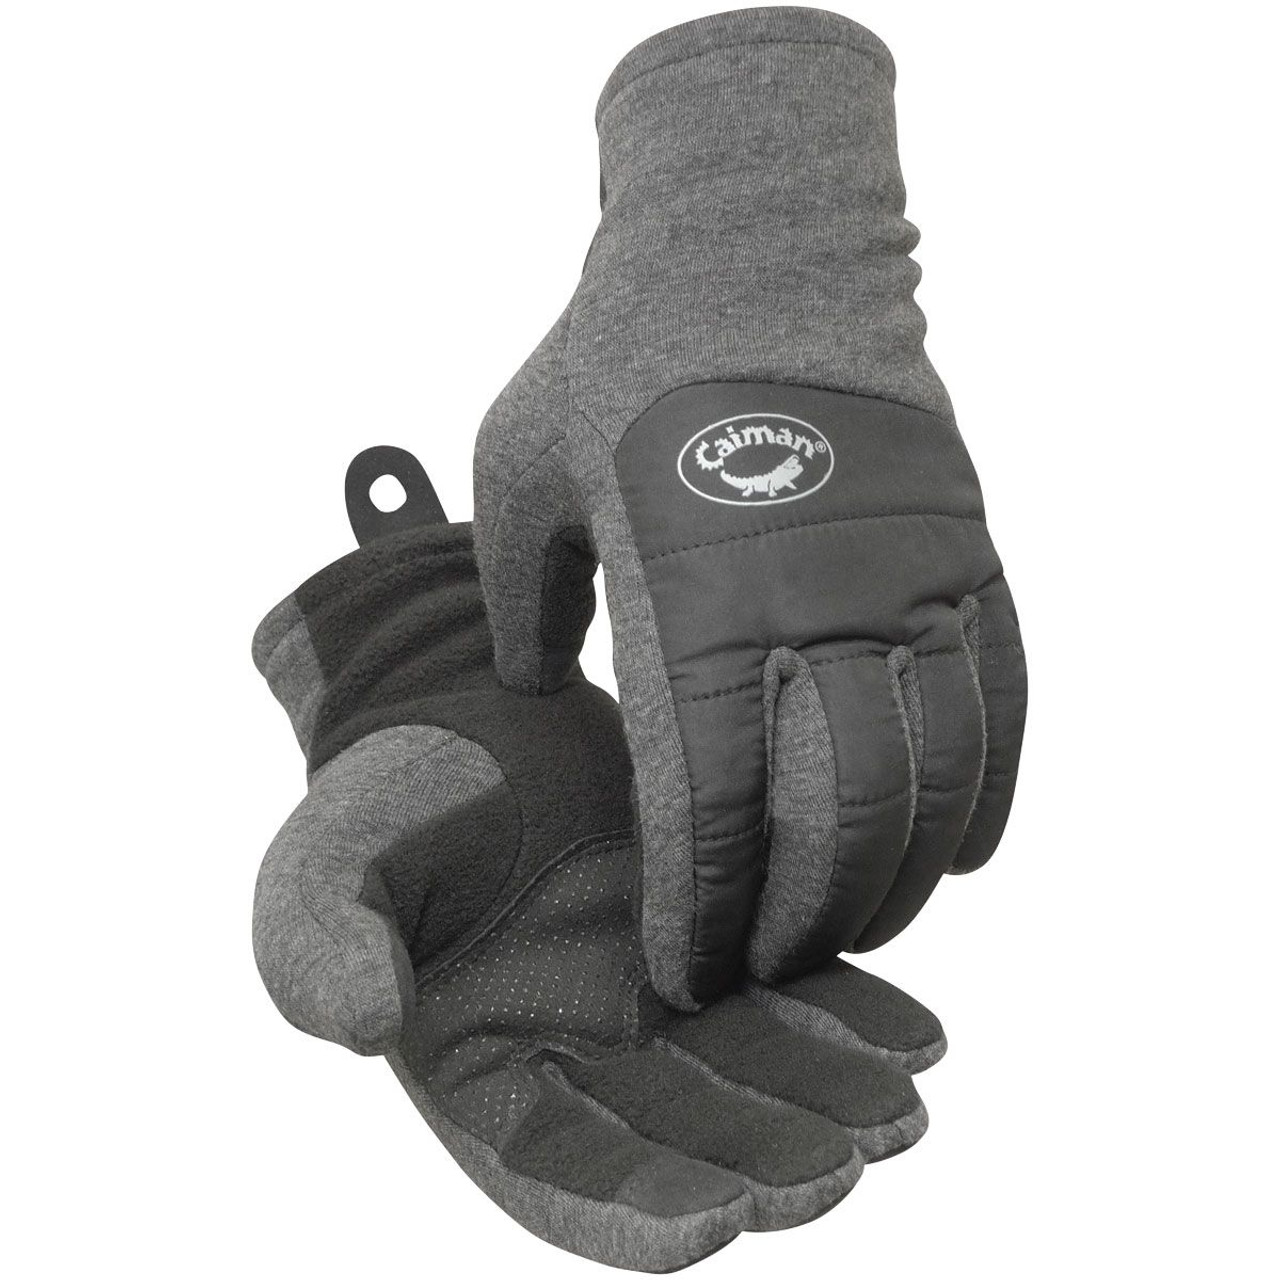 CAIMAN F-TEC COOL CLIMATE GLOVES, BLACK -S